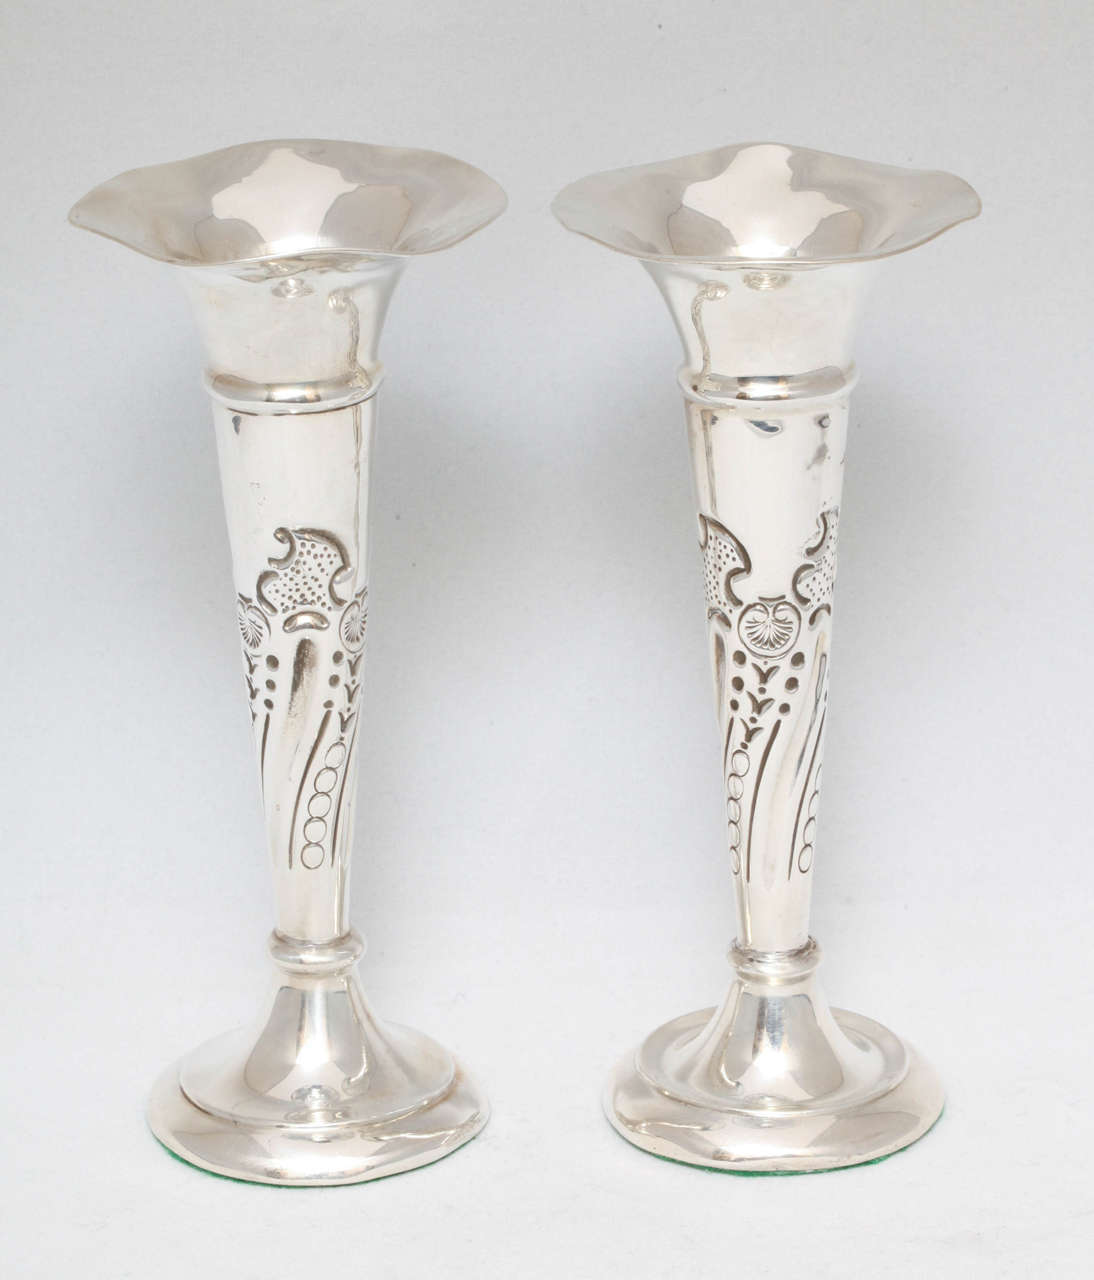 Edwardian pair of sterling silver bud vases, Chester, England, 1902, H.E.B and F.E.B. - makers. Each vase is @6